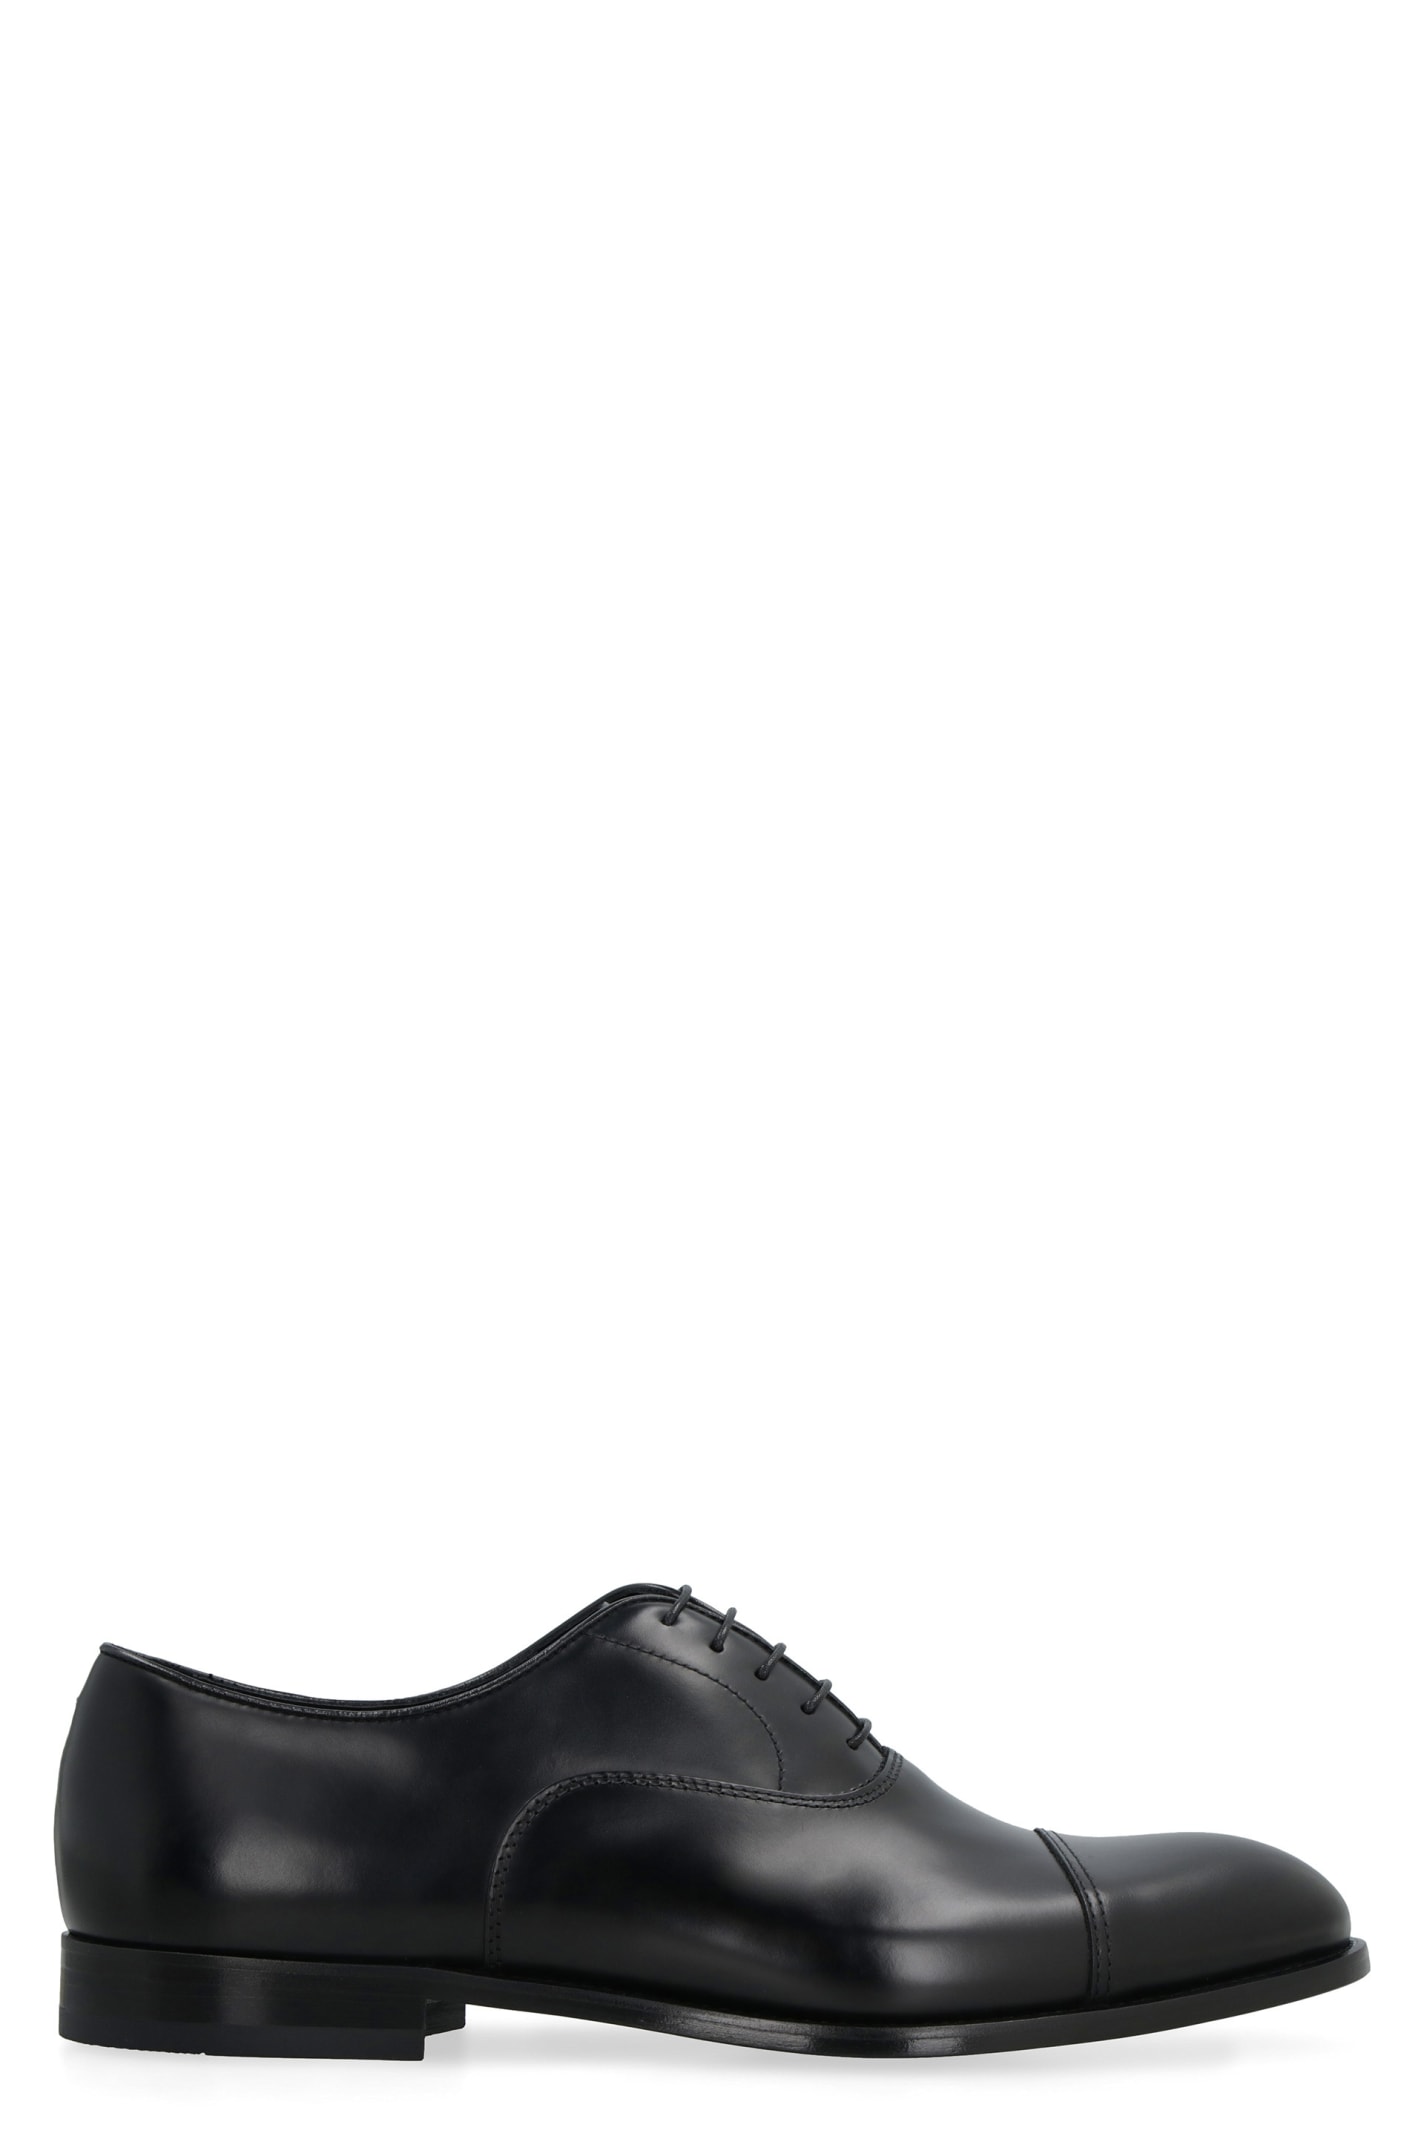 Doucal's Old Leather Lace-up Shoes In Black